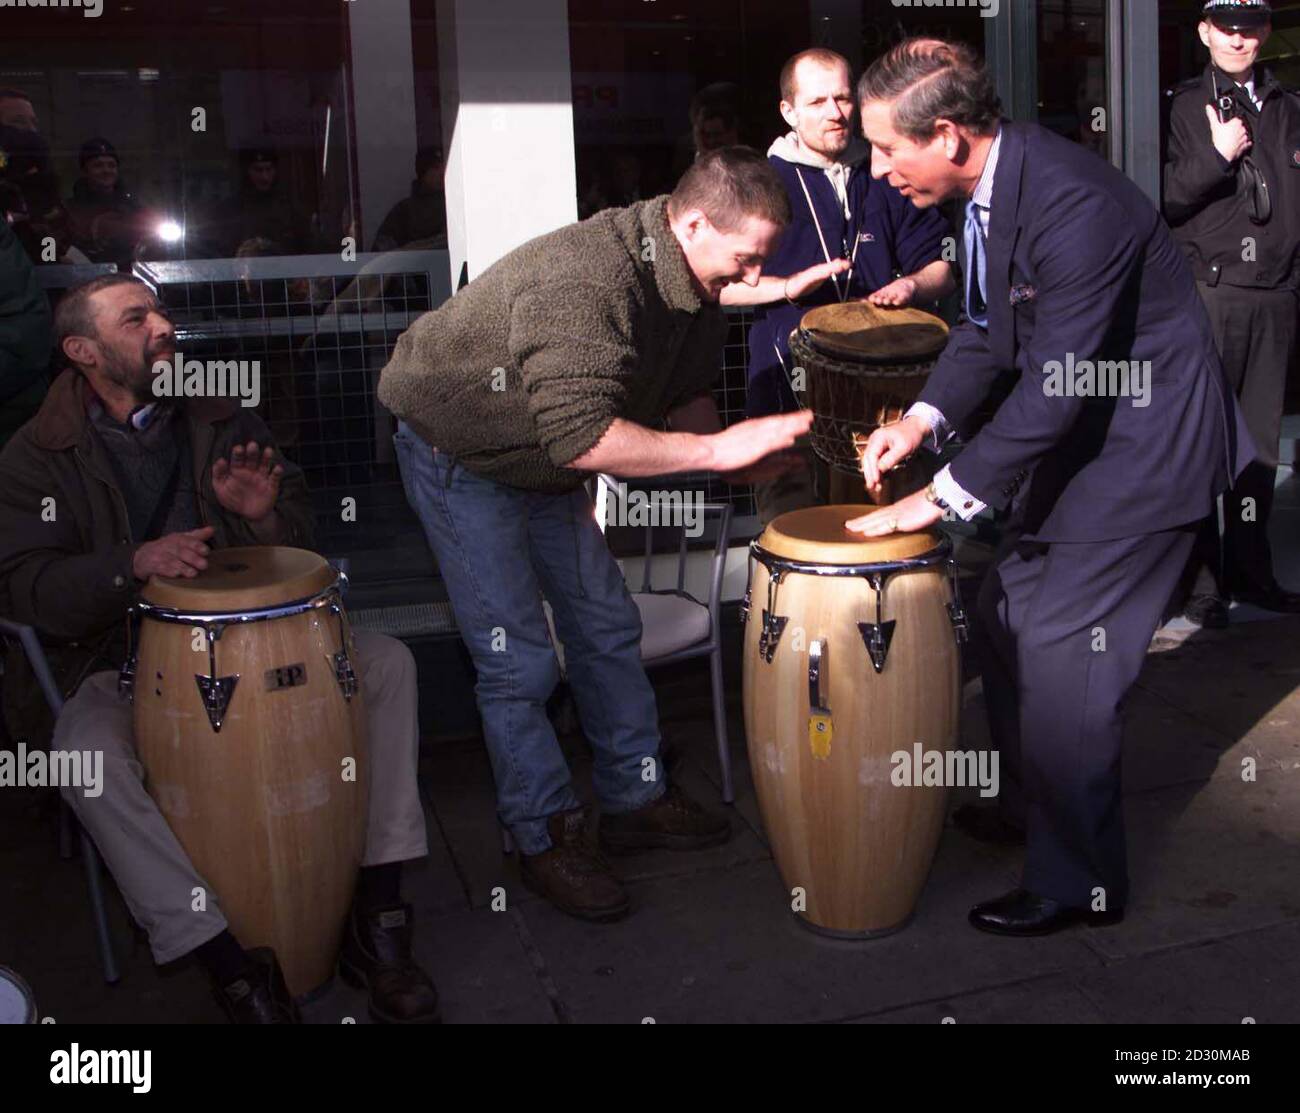 The Prince of Wales (R) attempts a tune with Big Issue seller Mike Martin on the drums during a visit to Ancoats in Manchester as part of a tour of regeneration projects in the North. * He was joined by the Crown Prince of Spain, Prince Felipe, The Prince of Asturias, who flew to Britain on a Guest of Government visit. Stock Photo